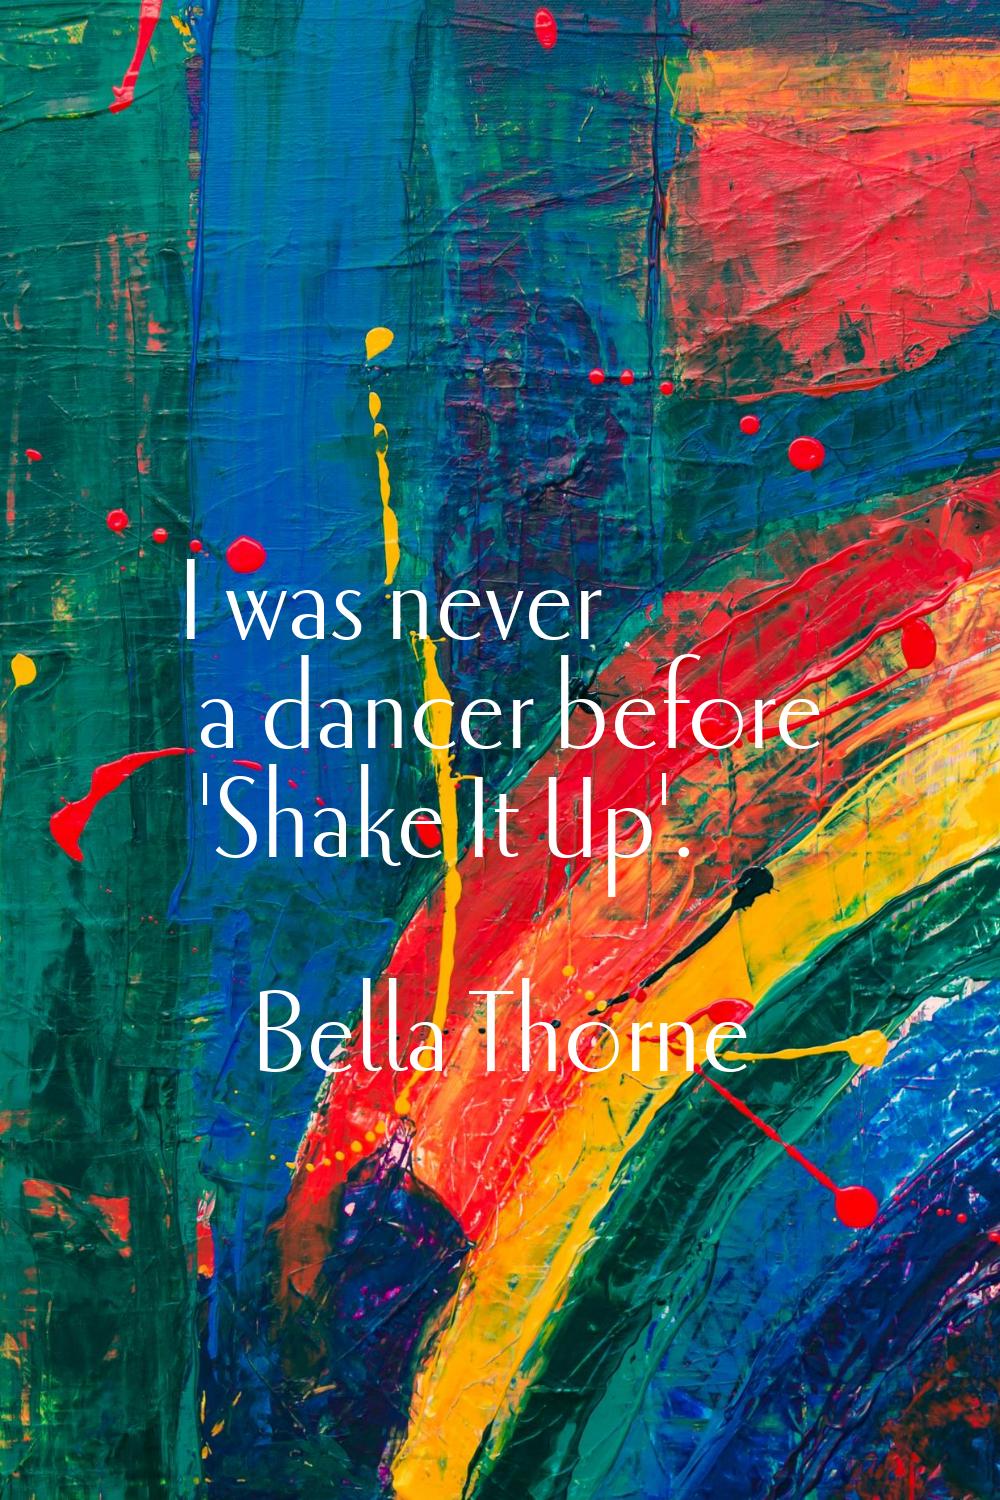 I was never a dancer before 'Shake It Up'.